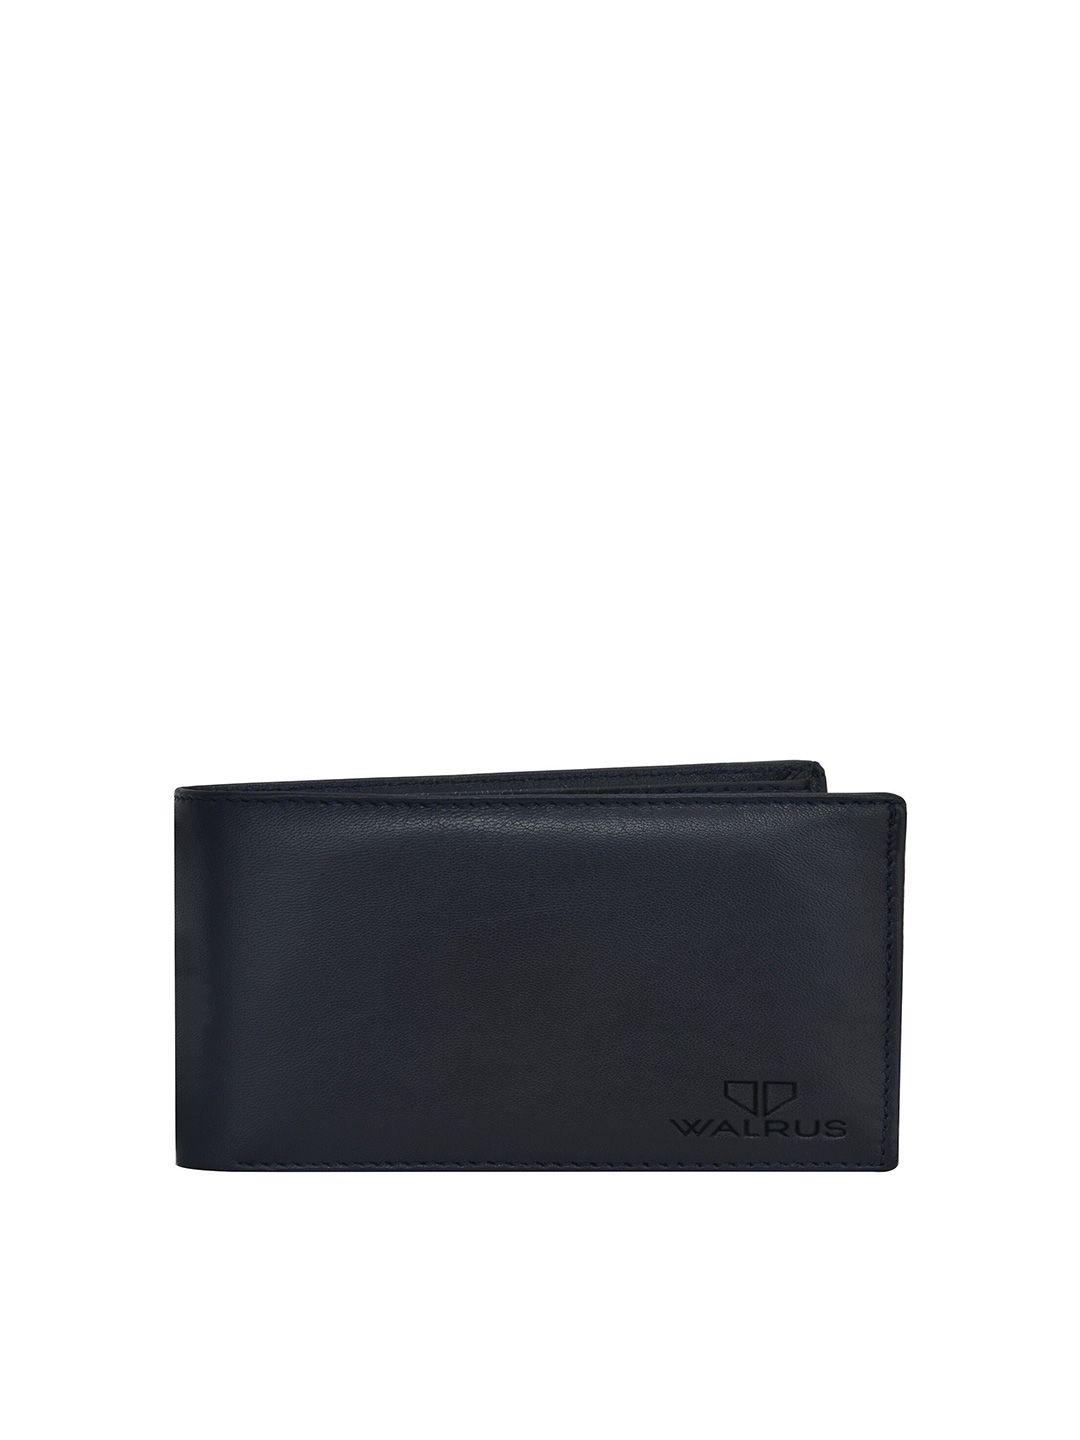 walrus men leather two fold wallet with rfid